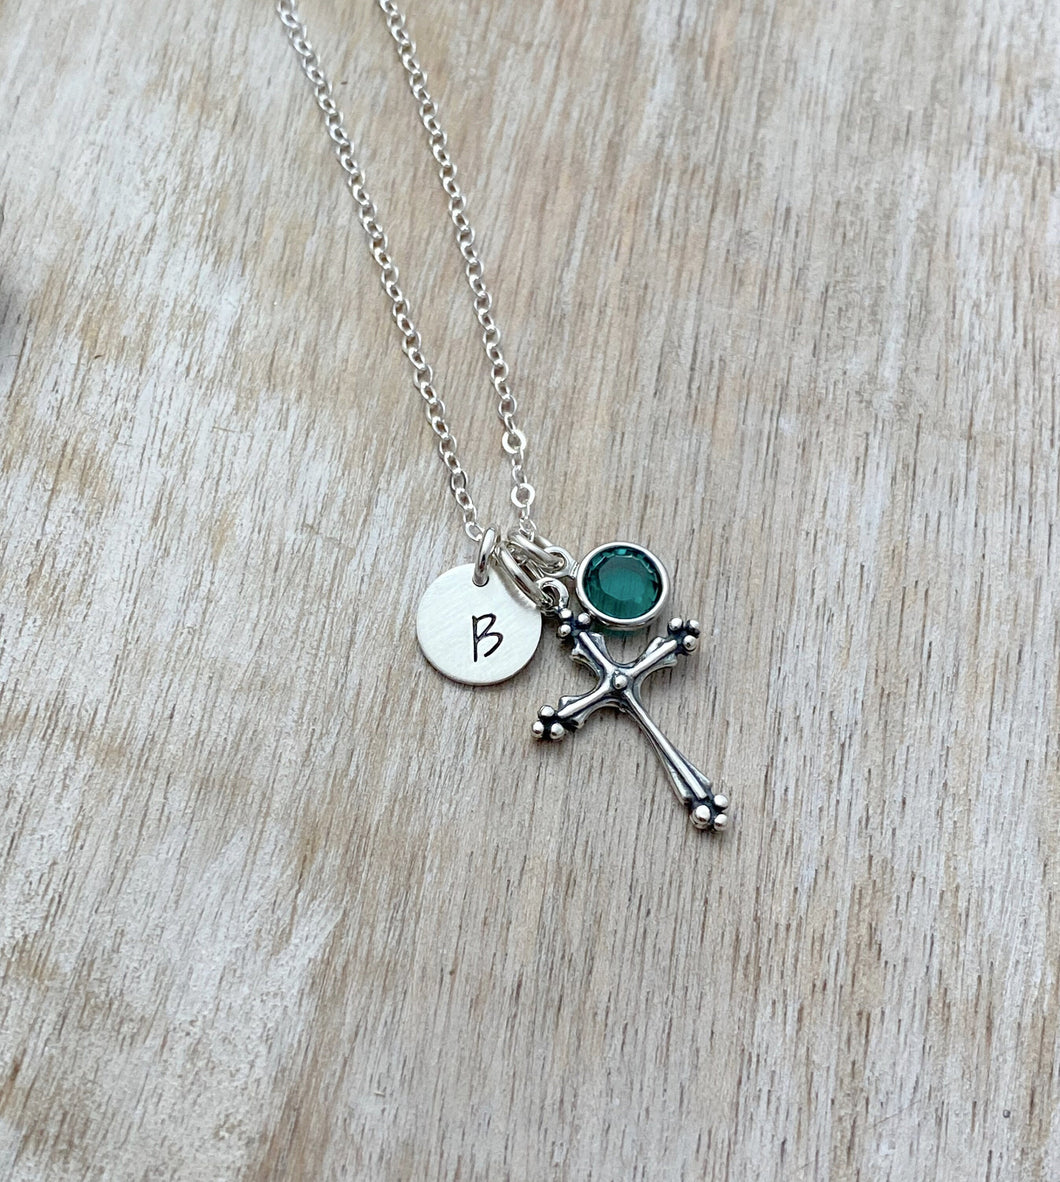 Personalized Charm Necklace with Sterling Silver Cross, Swarovski Crystal Birthstone and Initial Charm Made to Order - confirmation gift